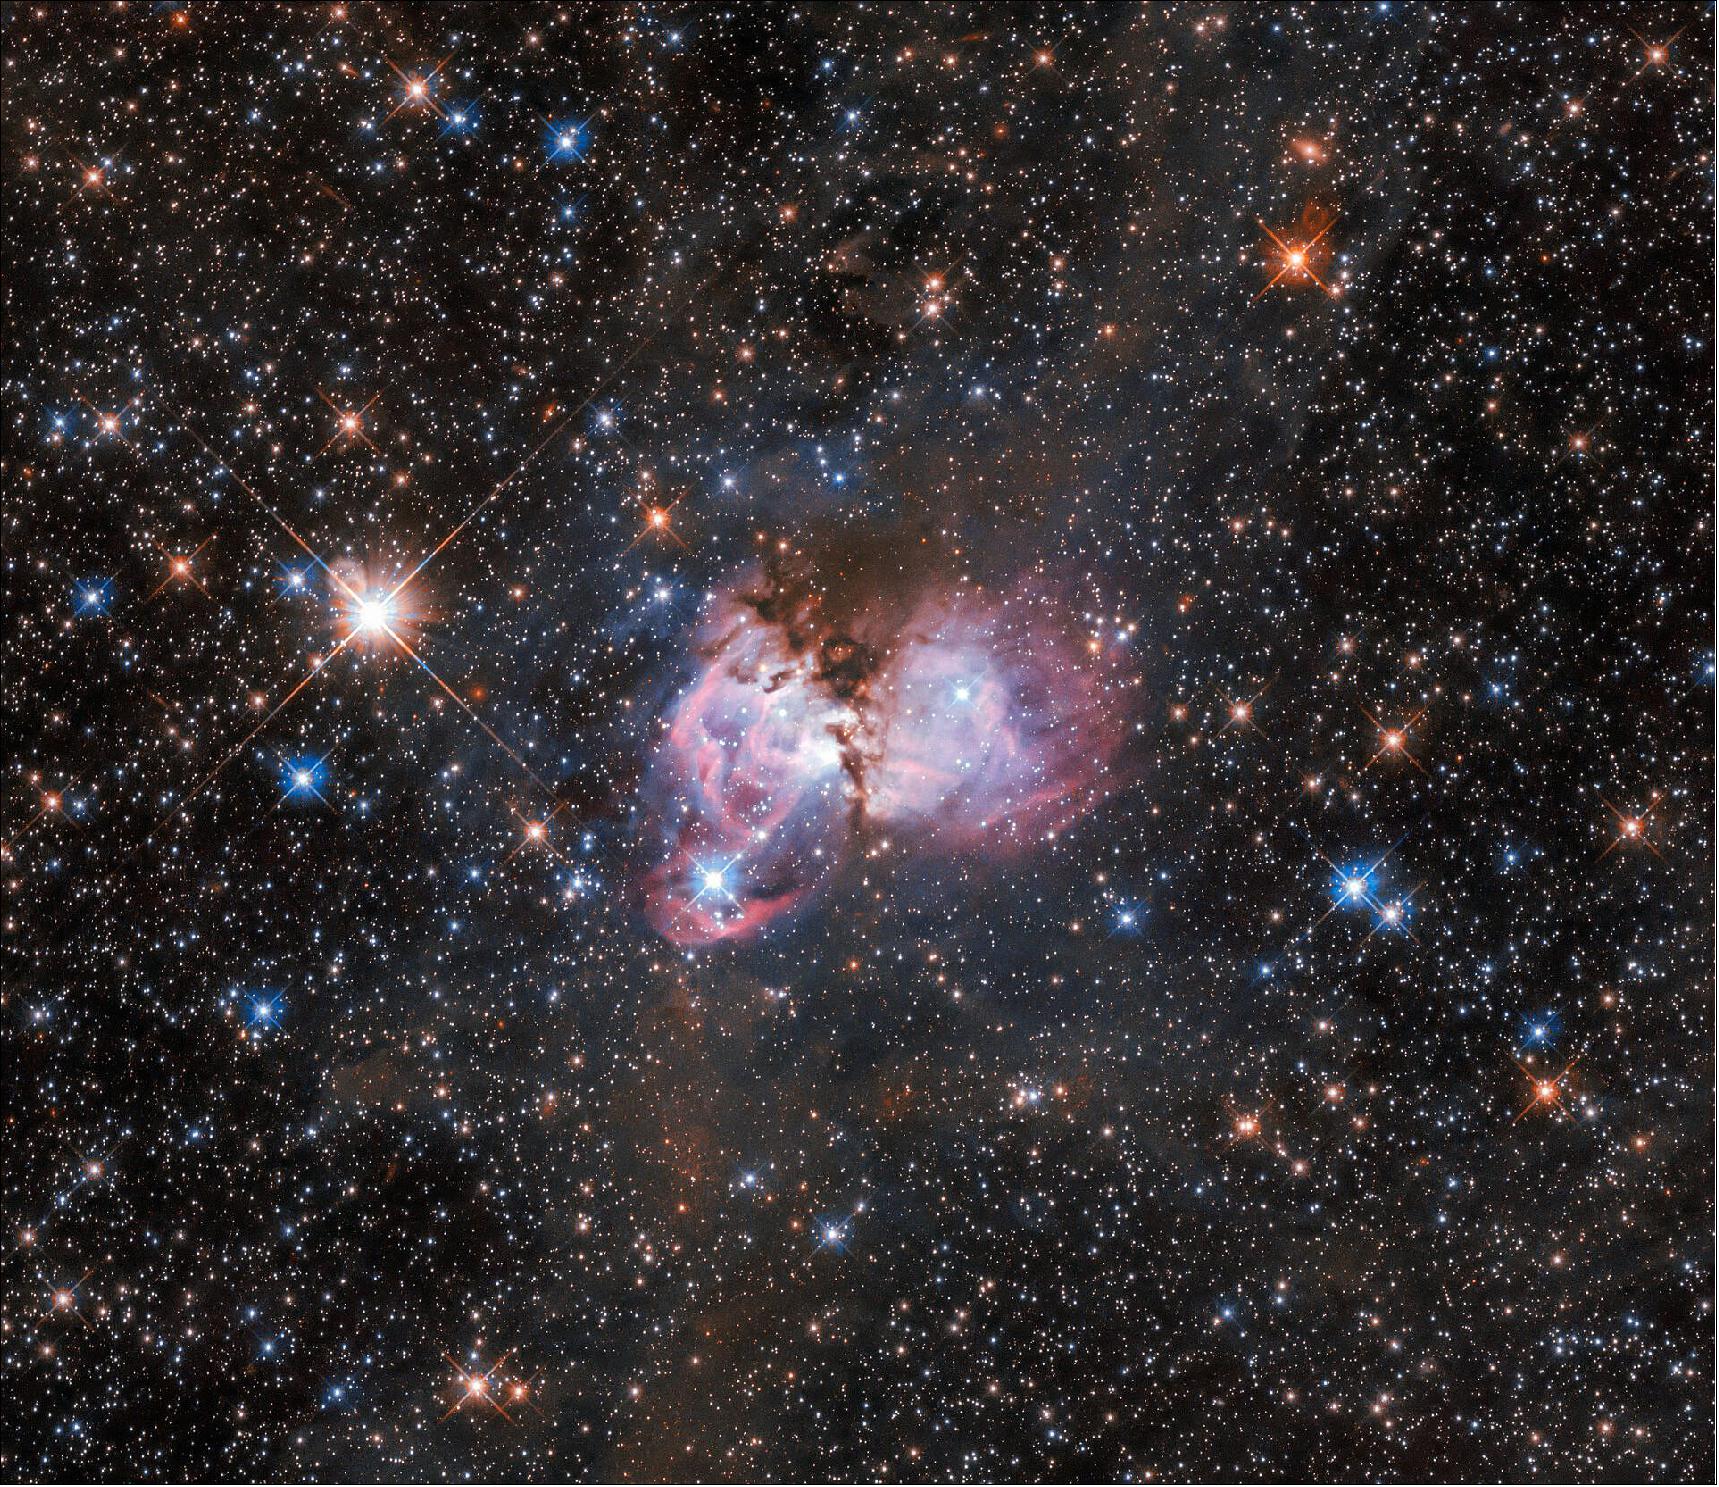 Figure 85: A massive laboratory. This image shows a region of space called LHA 120-N150. It is a substructure of the gigantic Tarantula Nebula. The latter is the largest known stellar nursery in the local Universe. The nebula is situated more than 160,000 light-years away in the Large Magellanic Cloud, a neighboring dwarf irregular galaxy that orbits the Milky Way (image credit: ESA/Hubble, NASA, I. Stephens; CC BY 4.0)